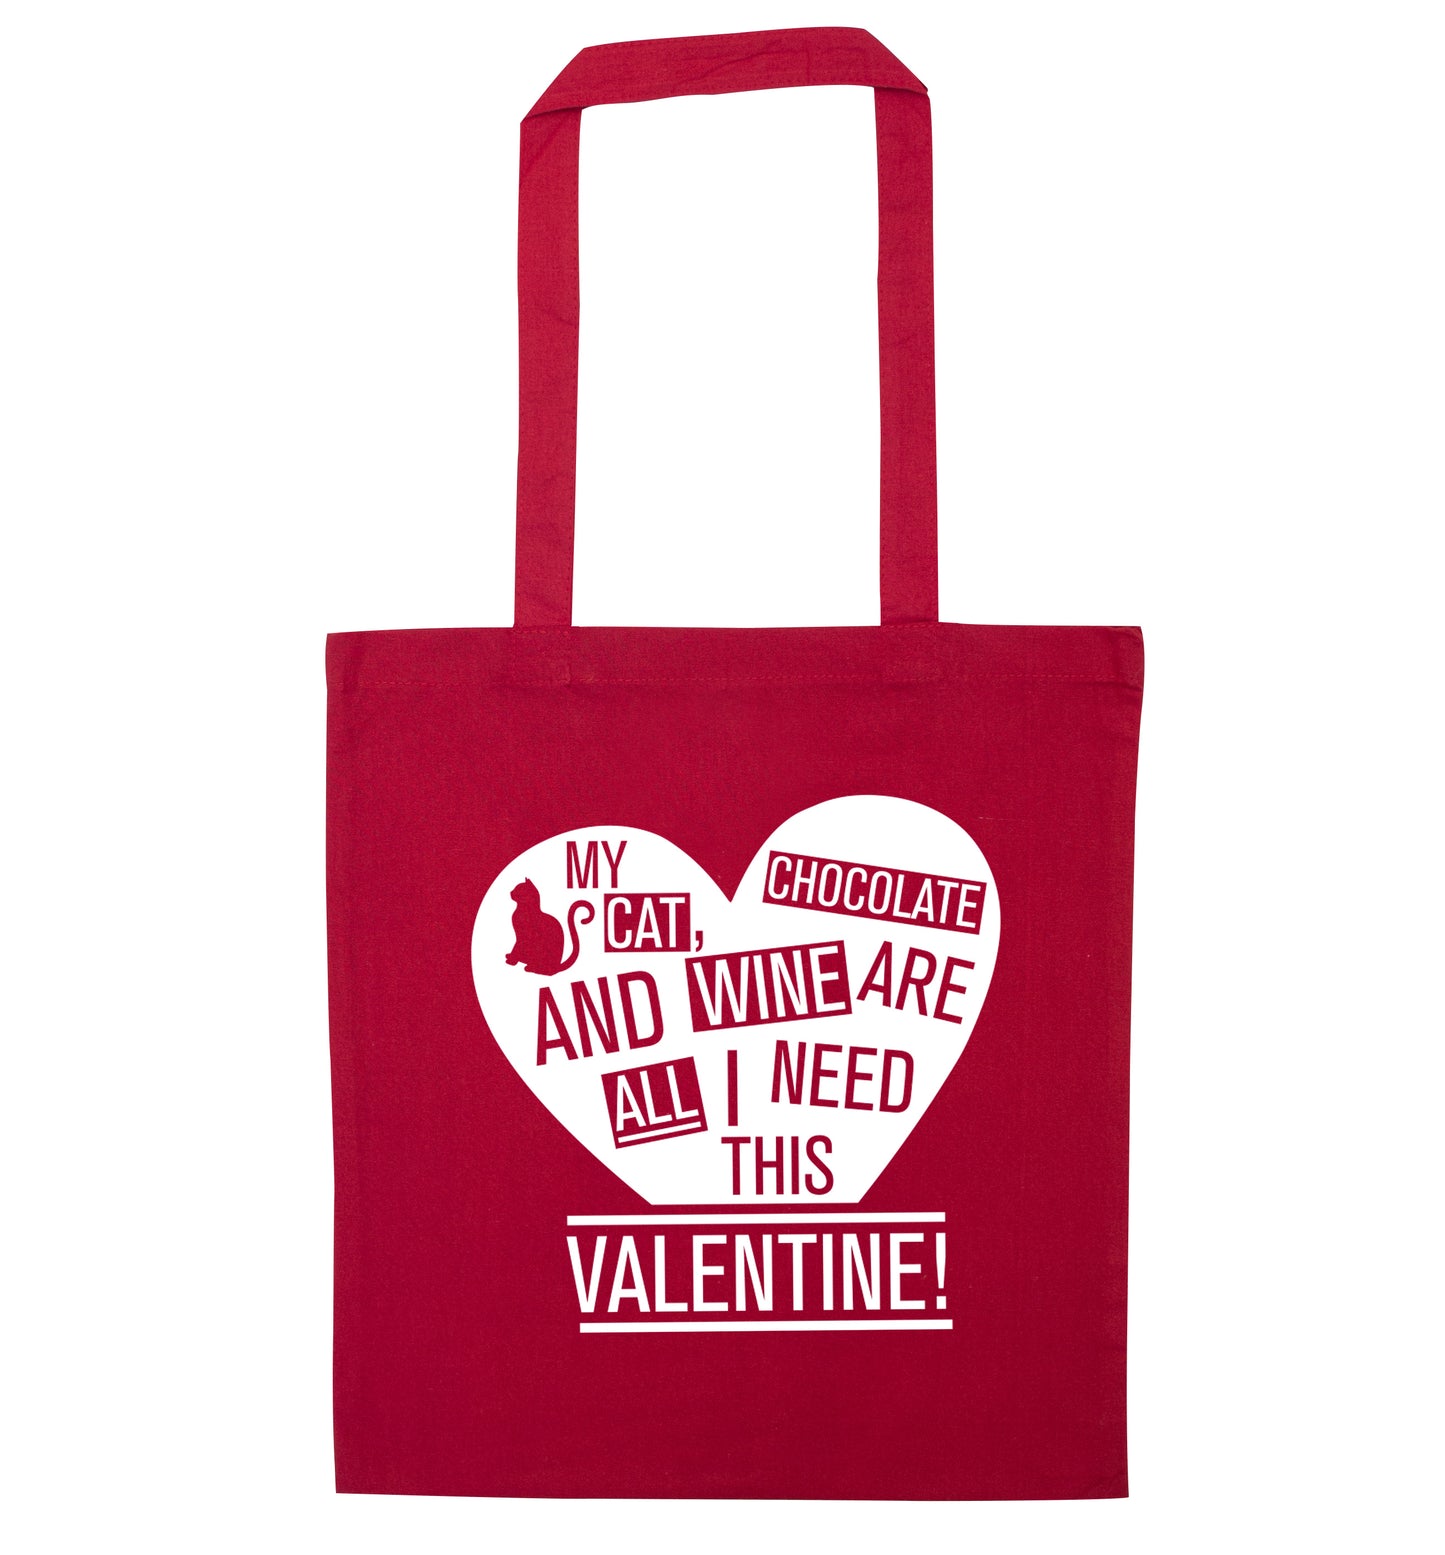 My cat, chocolate and wine are all I need this valentine! red tote bag